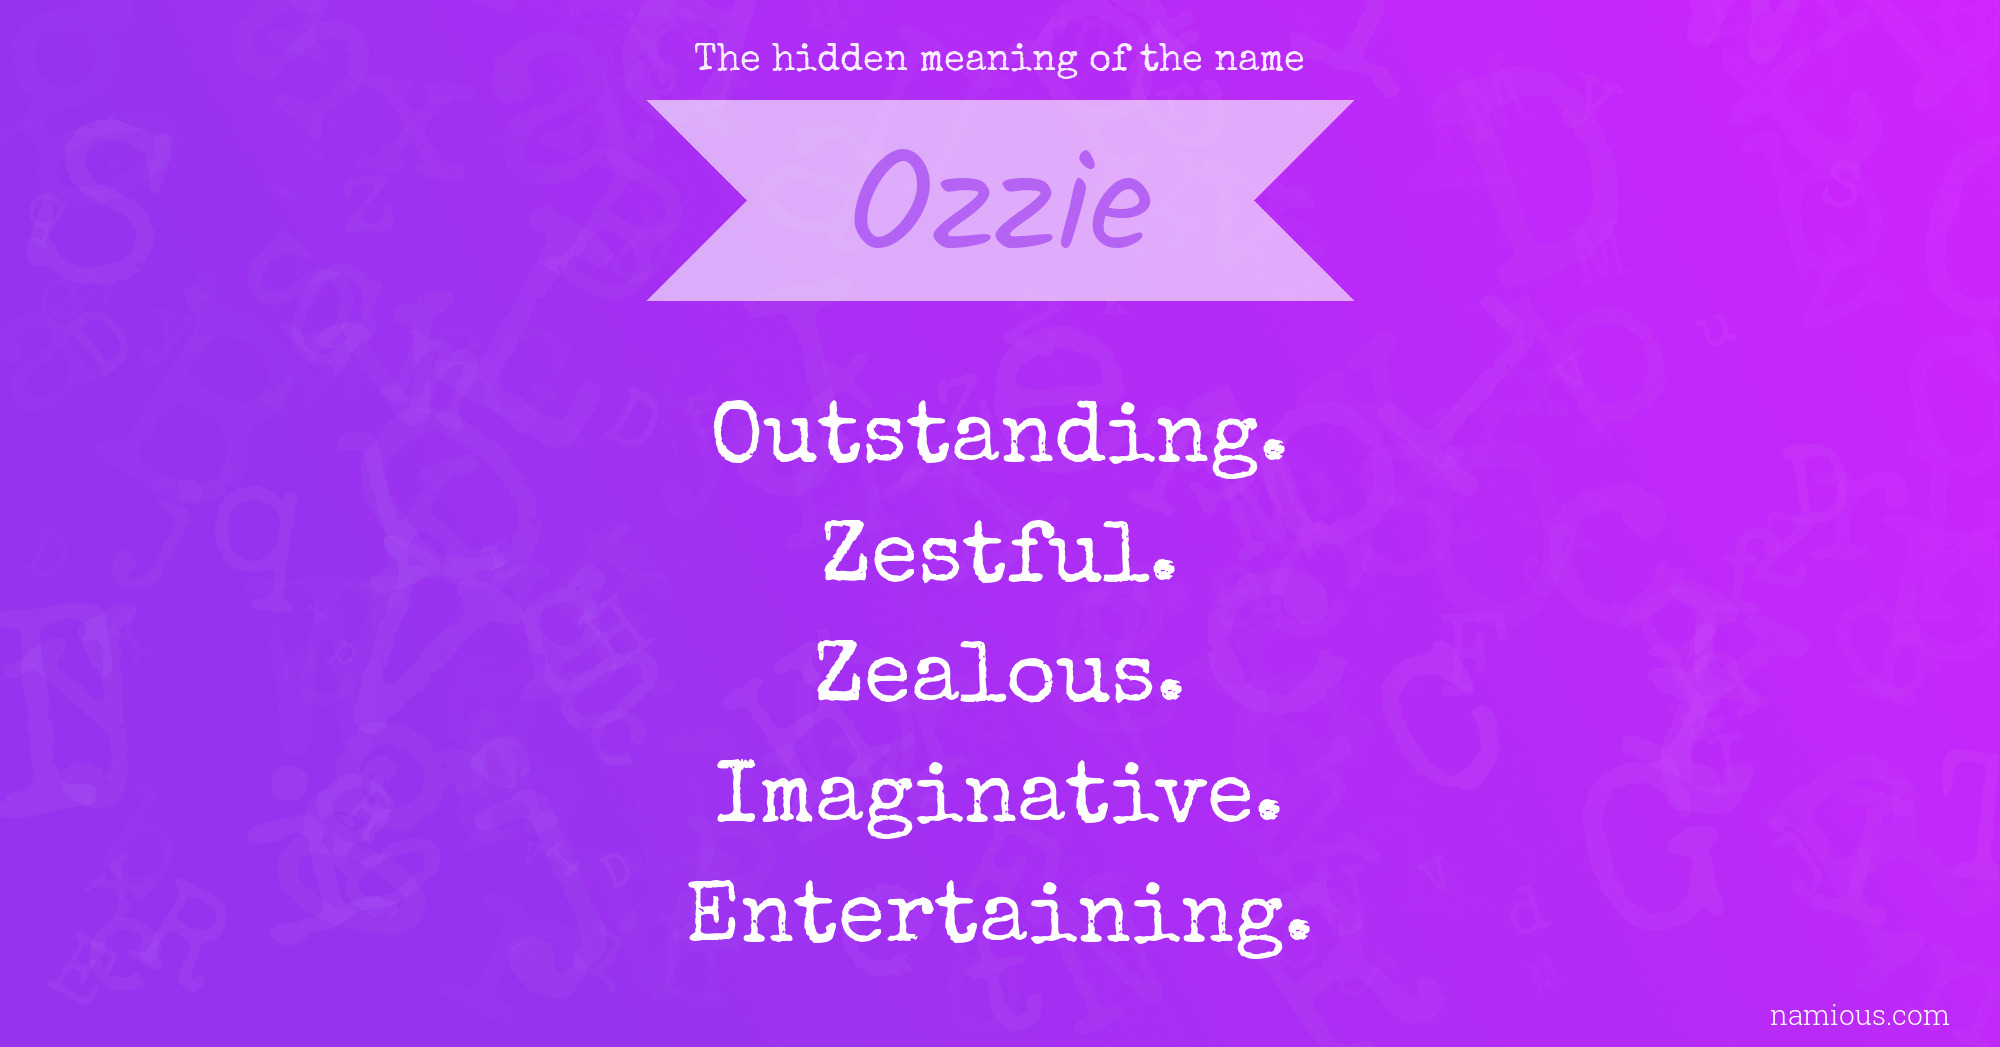 The hidden meaning of the name Ozzie